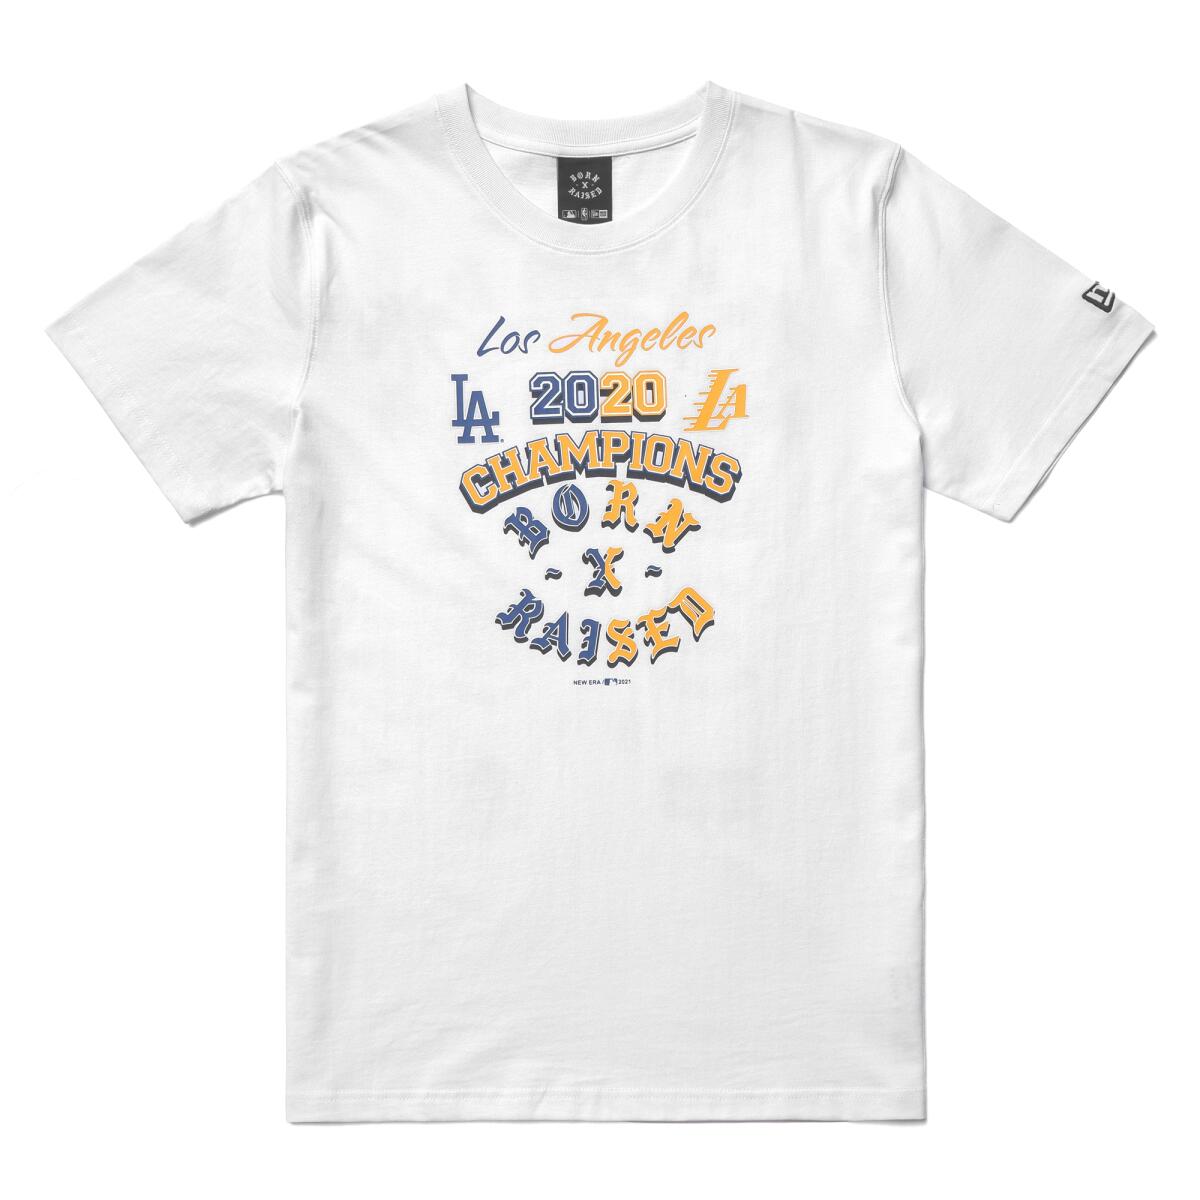 Born x Raised Launches LA Dodgers and Lakers 2020 Champions Capsule – WWD